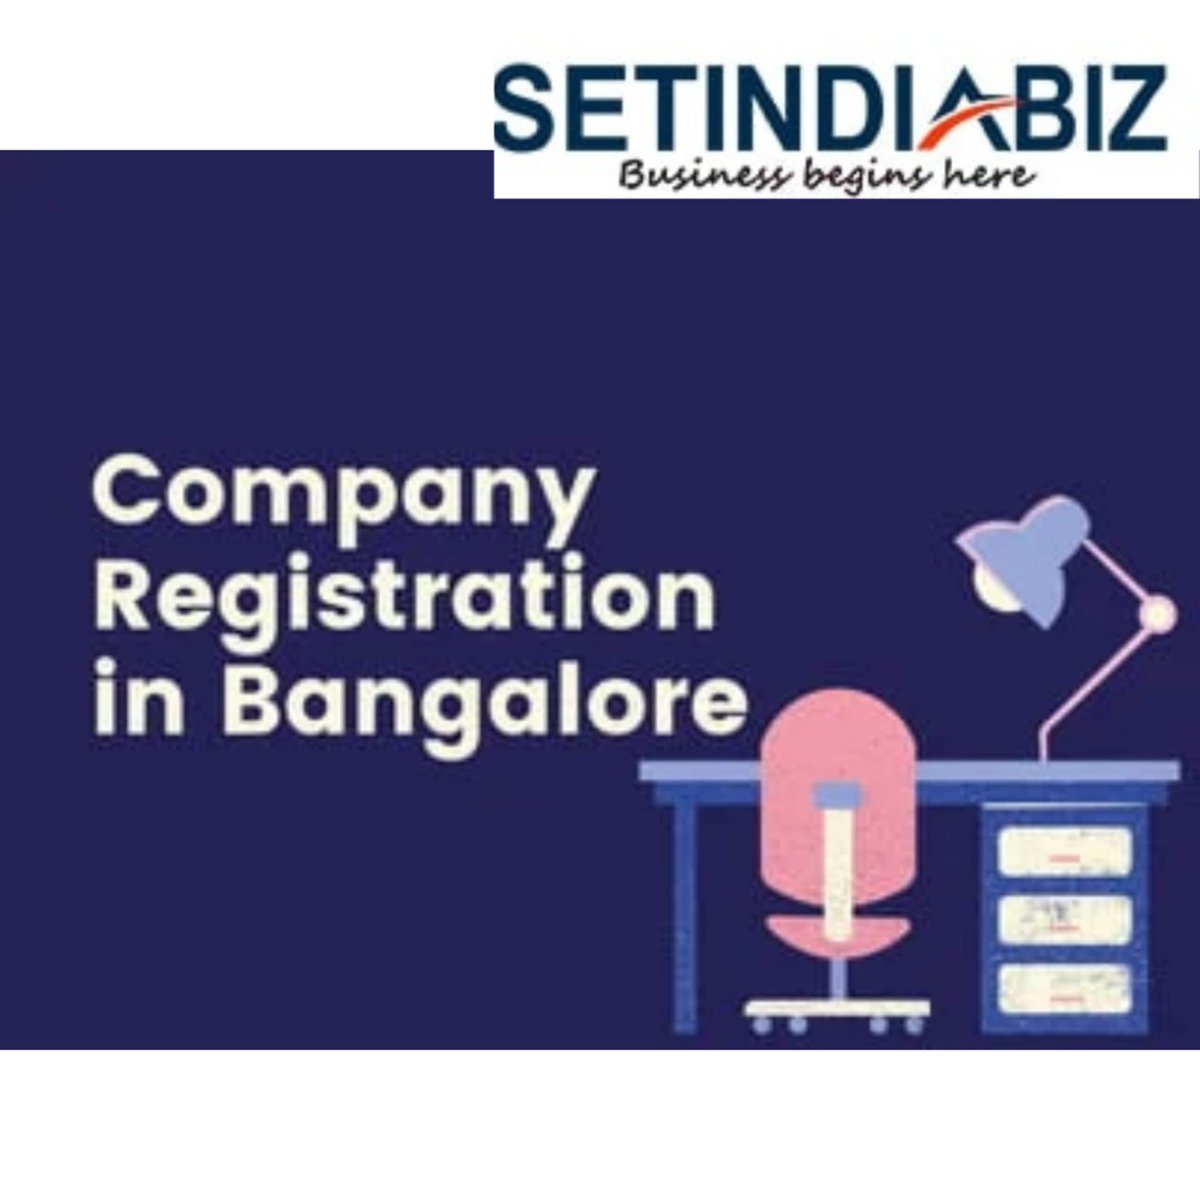 Company Registration In Bengaluru

Discover the hassle-free steps to register your company online in Bengaluru, celebrated for its entrepreneurial spirit and thriving ecosystem!

Visit at: setindiabiz.com/company-regist…

#CompanyRegistration #CompanyRegistrationInBengaluru #Setindiabiz